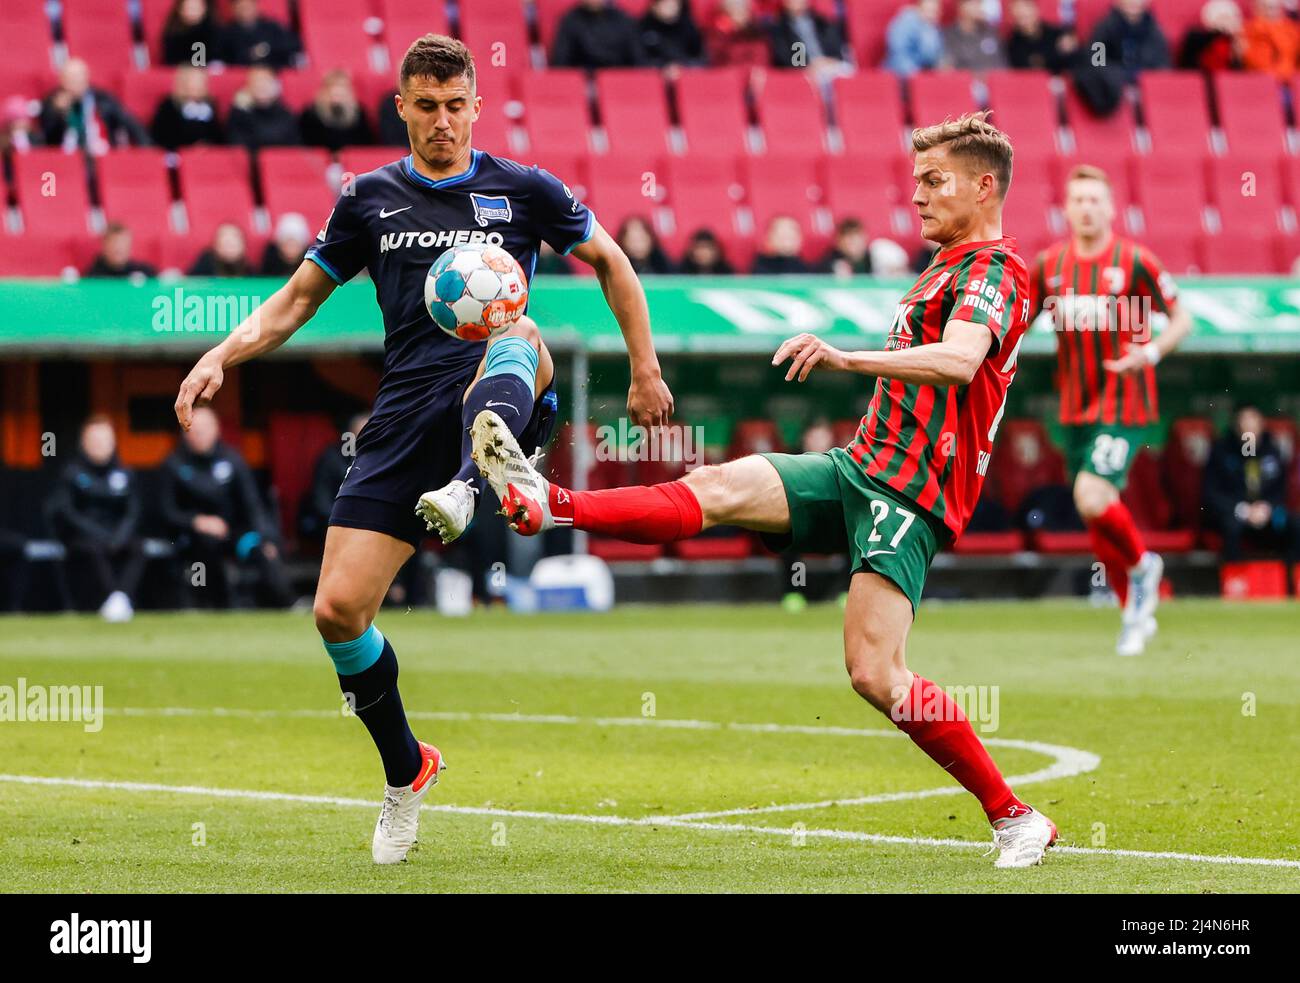 Augsburg, Germany. 16th Apr, 2022. Marc Oliver Kempf (L) of Hertha vies with Alfred Finnbogason of Augsburg during their German Bundesliga match in Augsburg, Germany, April 16, 2022. Hertha won 1-0. Credit: Philippe Ruiz/Xinhua/Alamy Live News Stock Photo